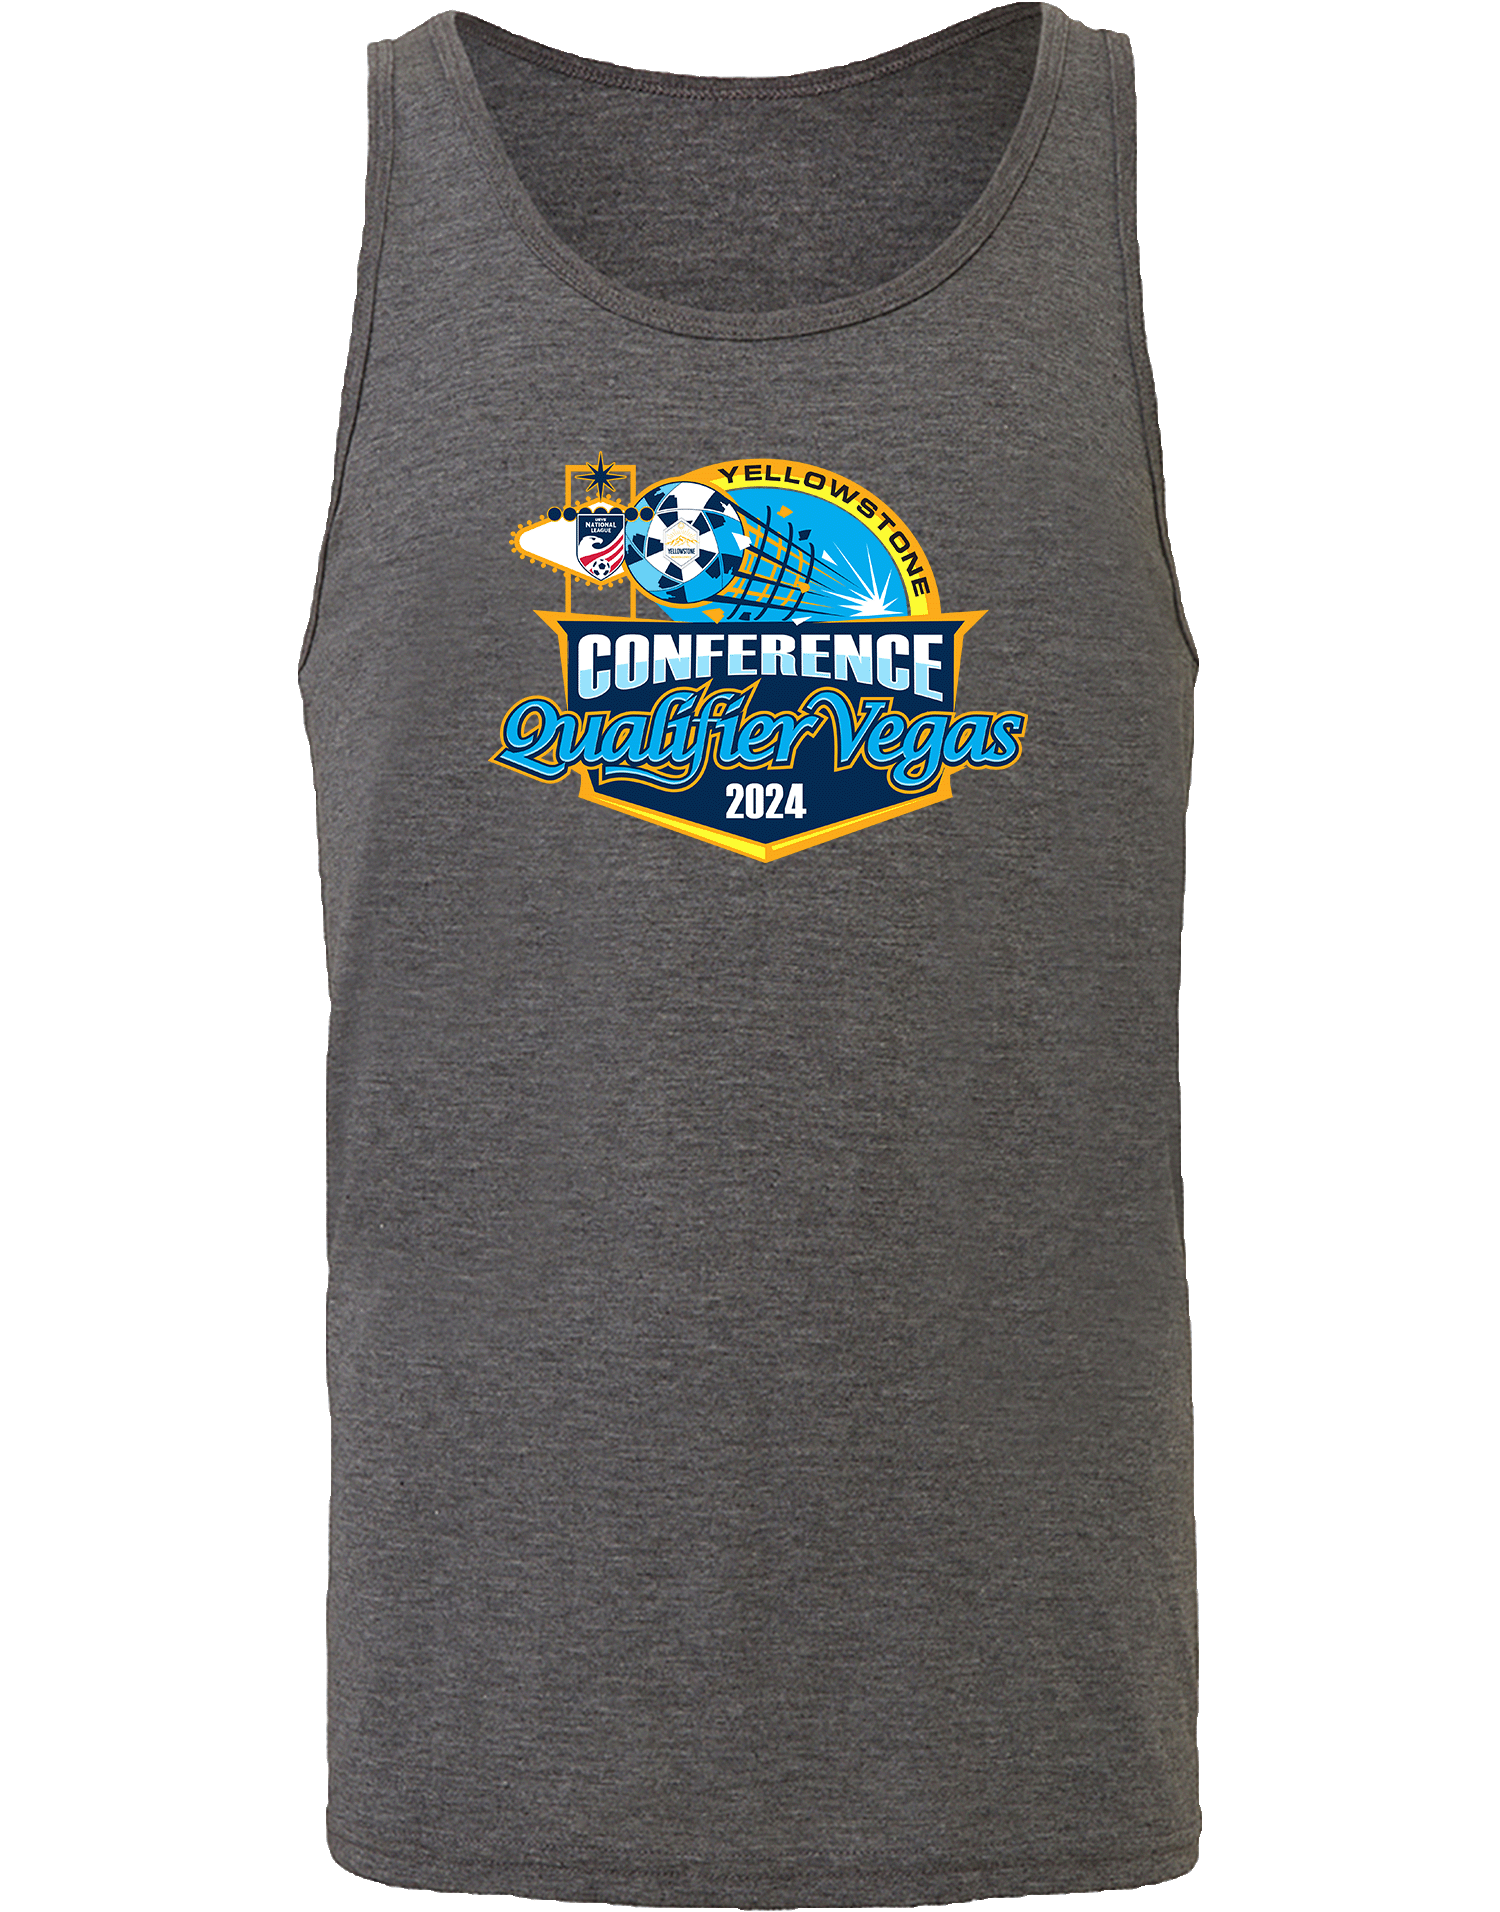 Tank Tops - 2024 Yellowstone Conference Qualifier Vegas